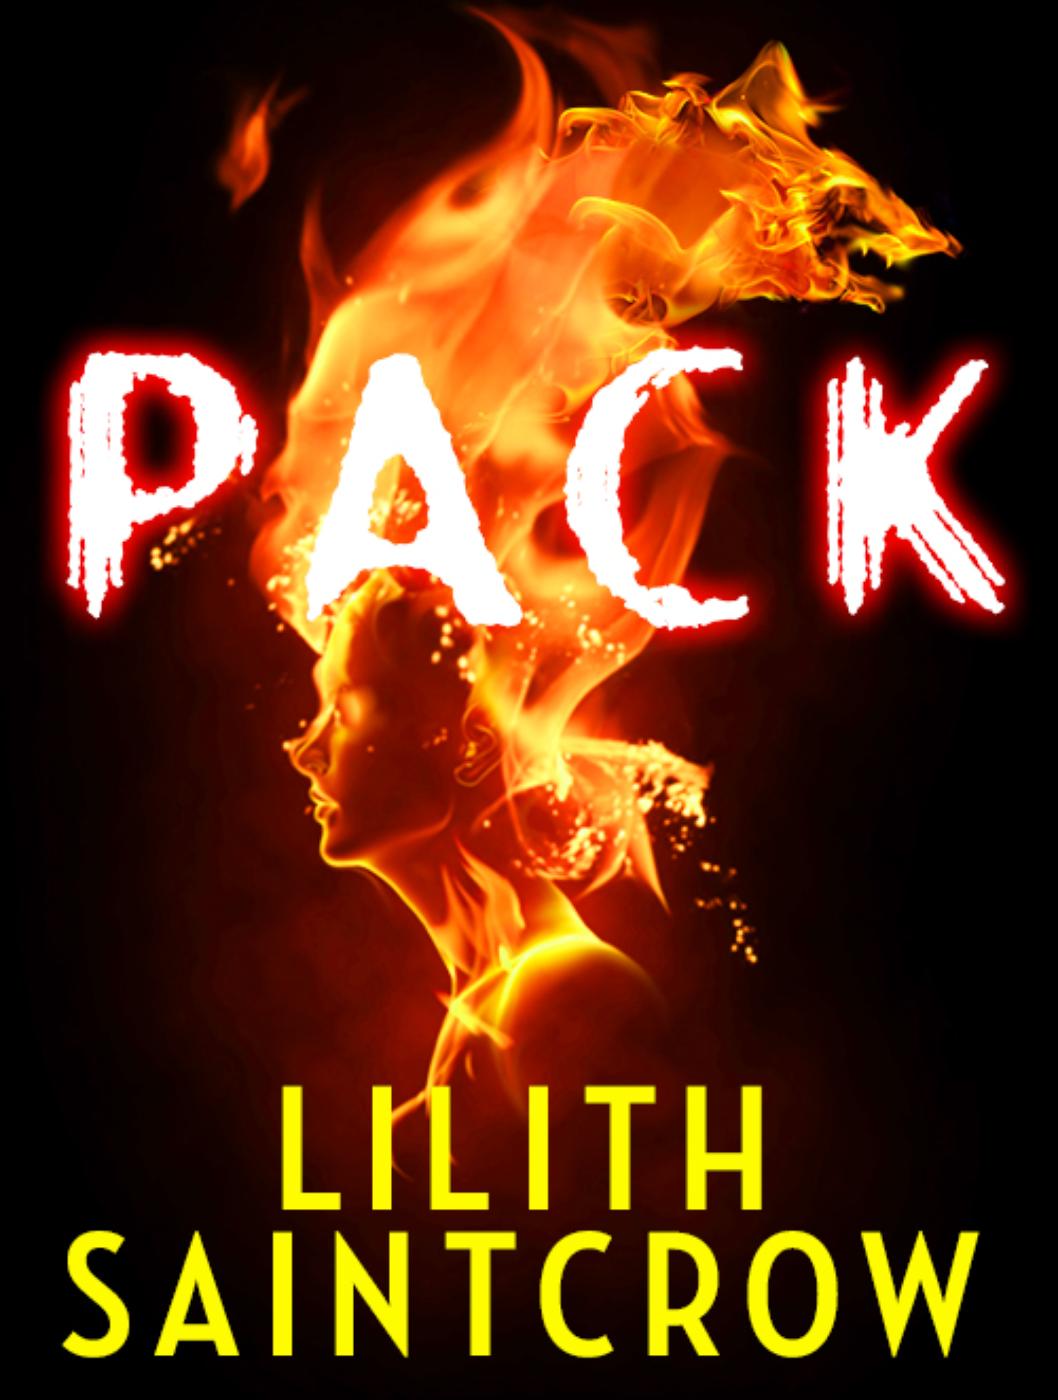 Pack (2014) by Lilith Saintcrow